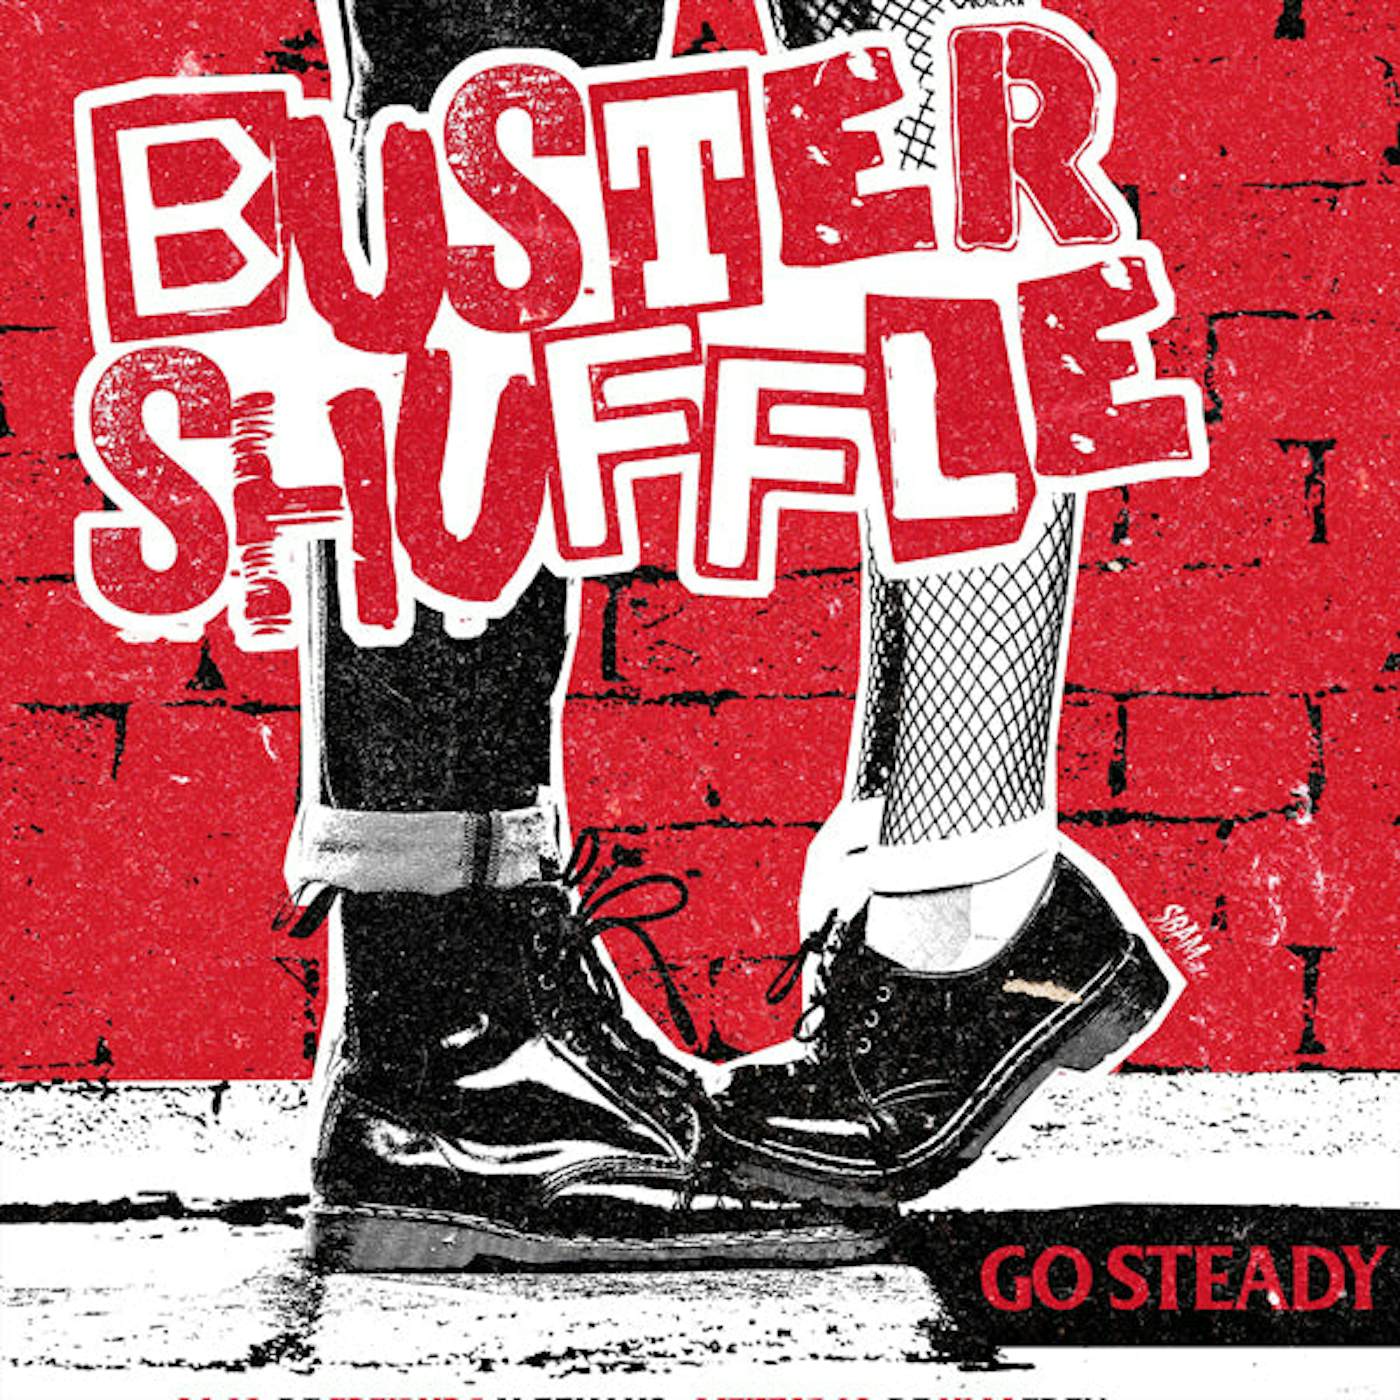 Buster Shuffle LP - Go Steady  (Uk Exclusive Red Vinyl)